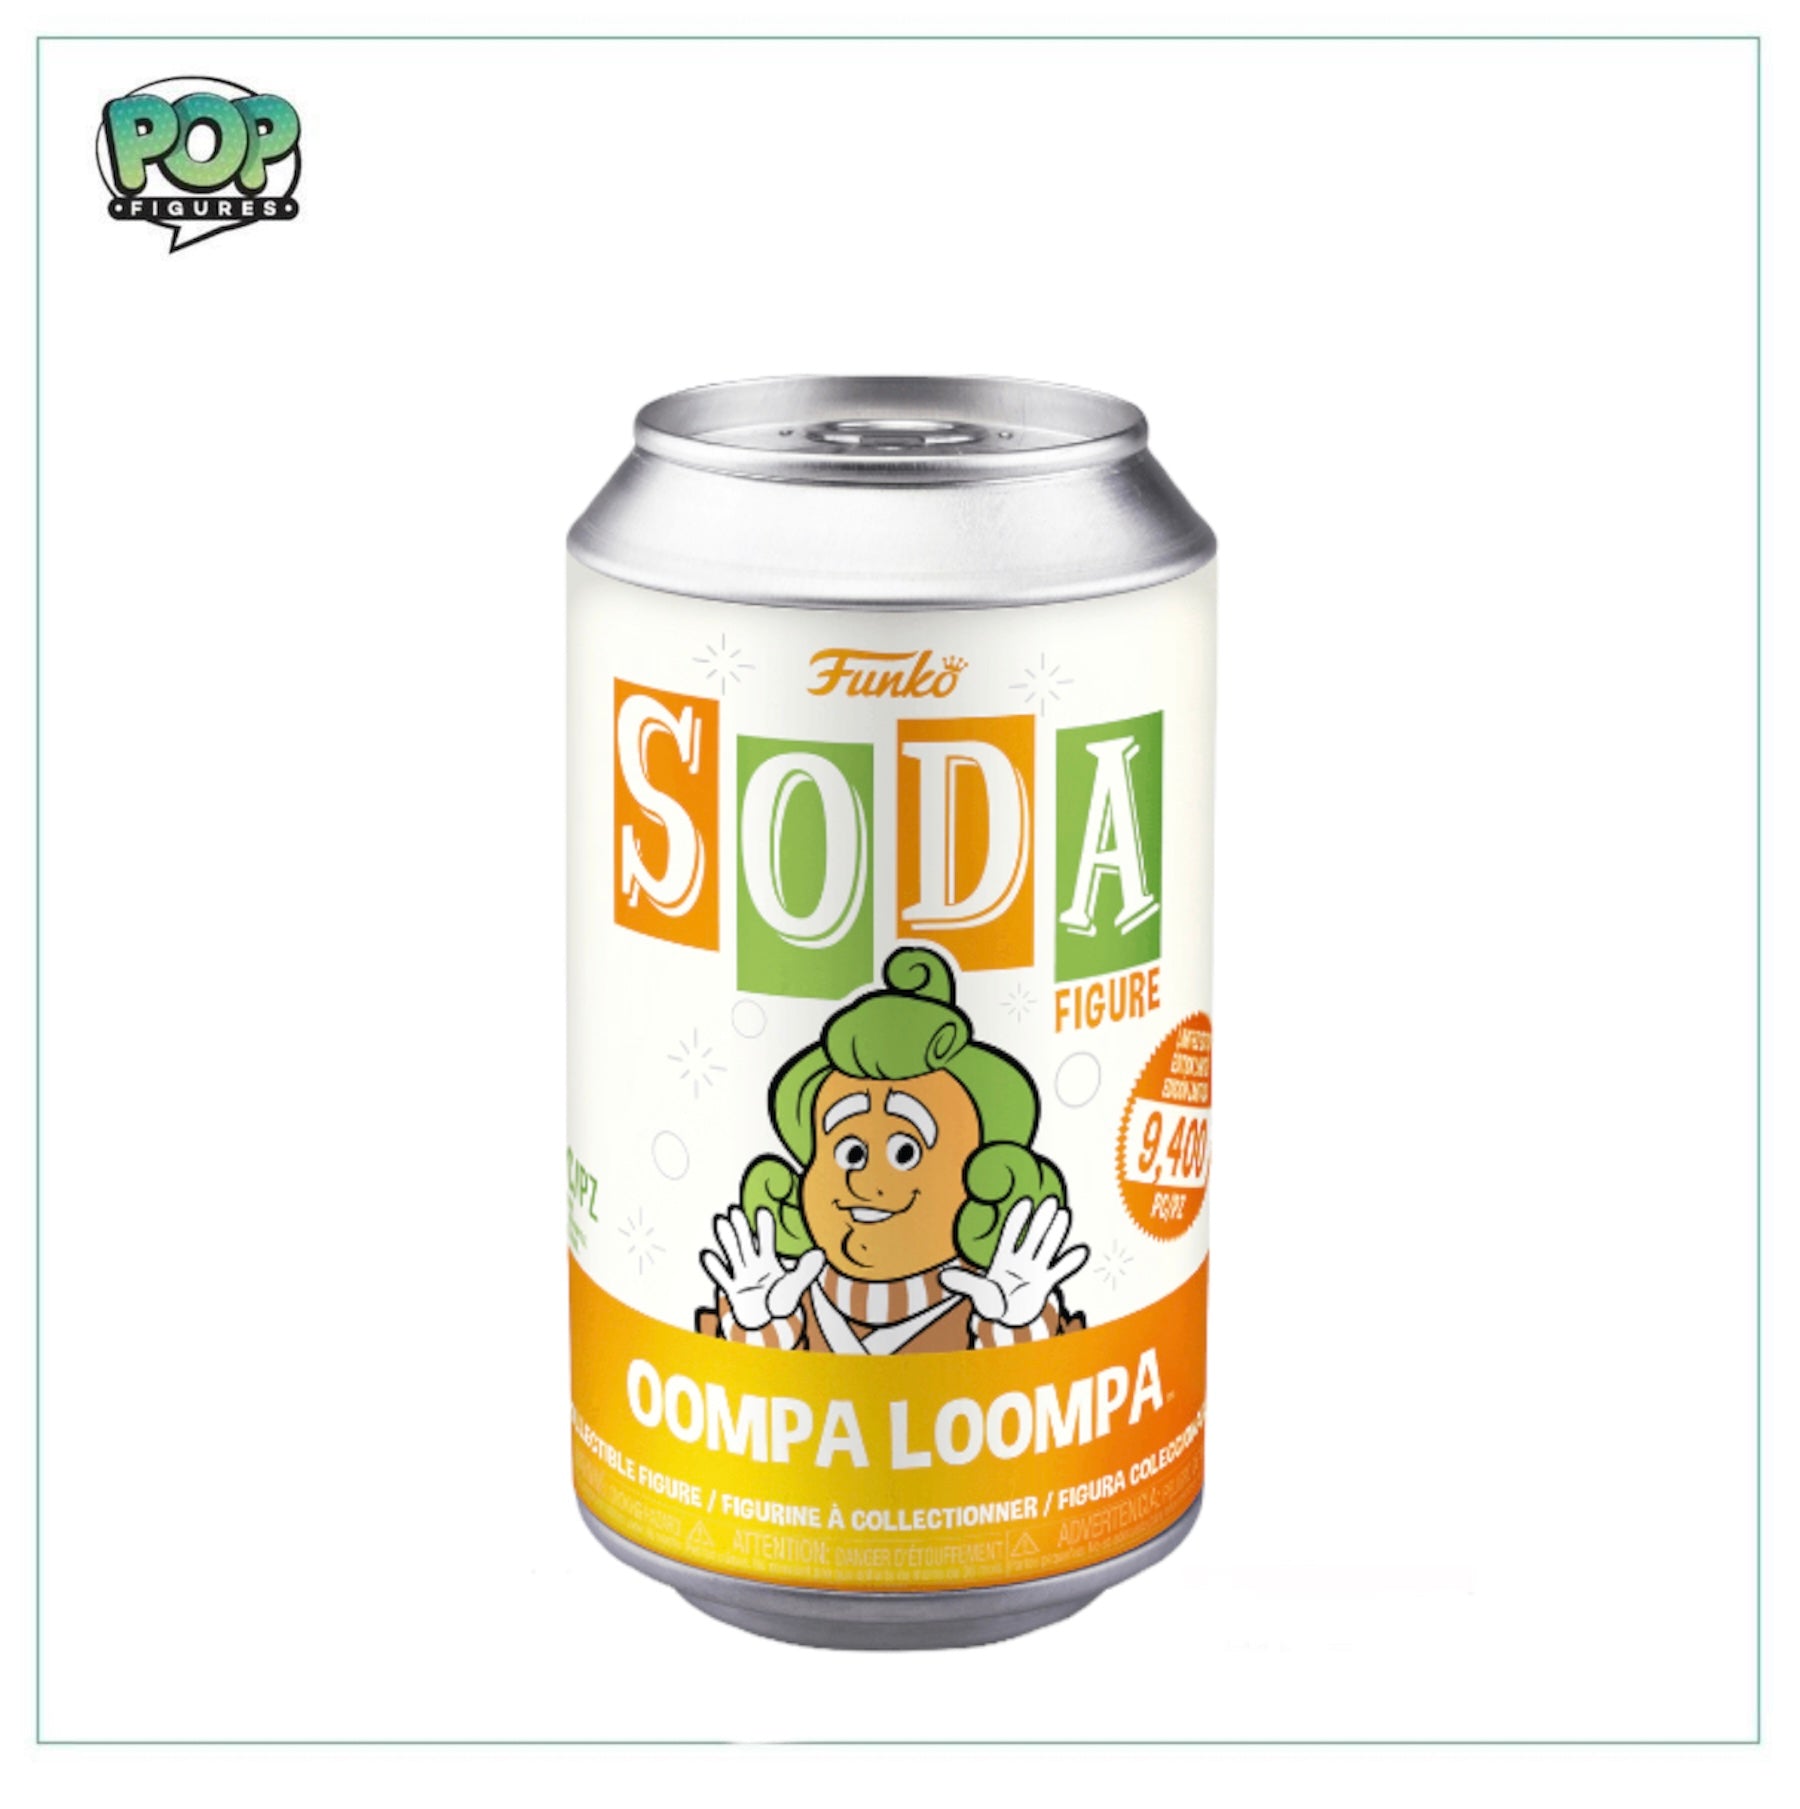 Oompa Loompa Funko Soda Vinyl Figure! - Willy Wonka And The Chocolate Factory - LE9400 Pcs - Chance Of Chase